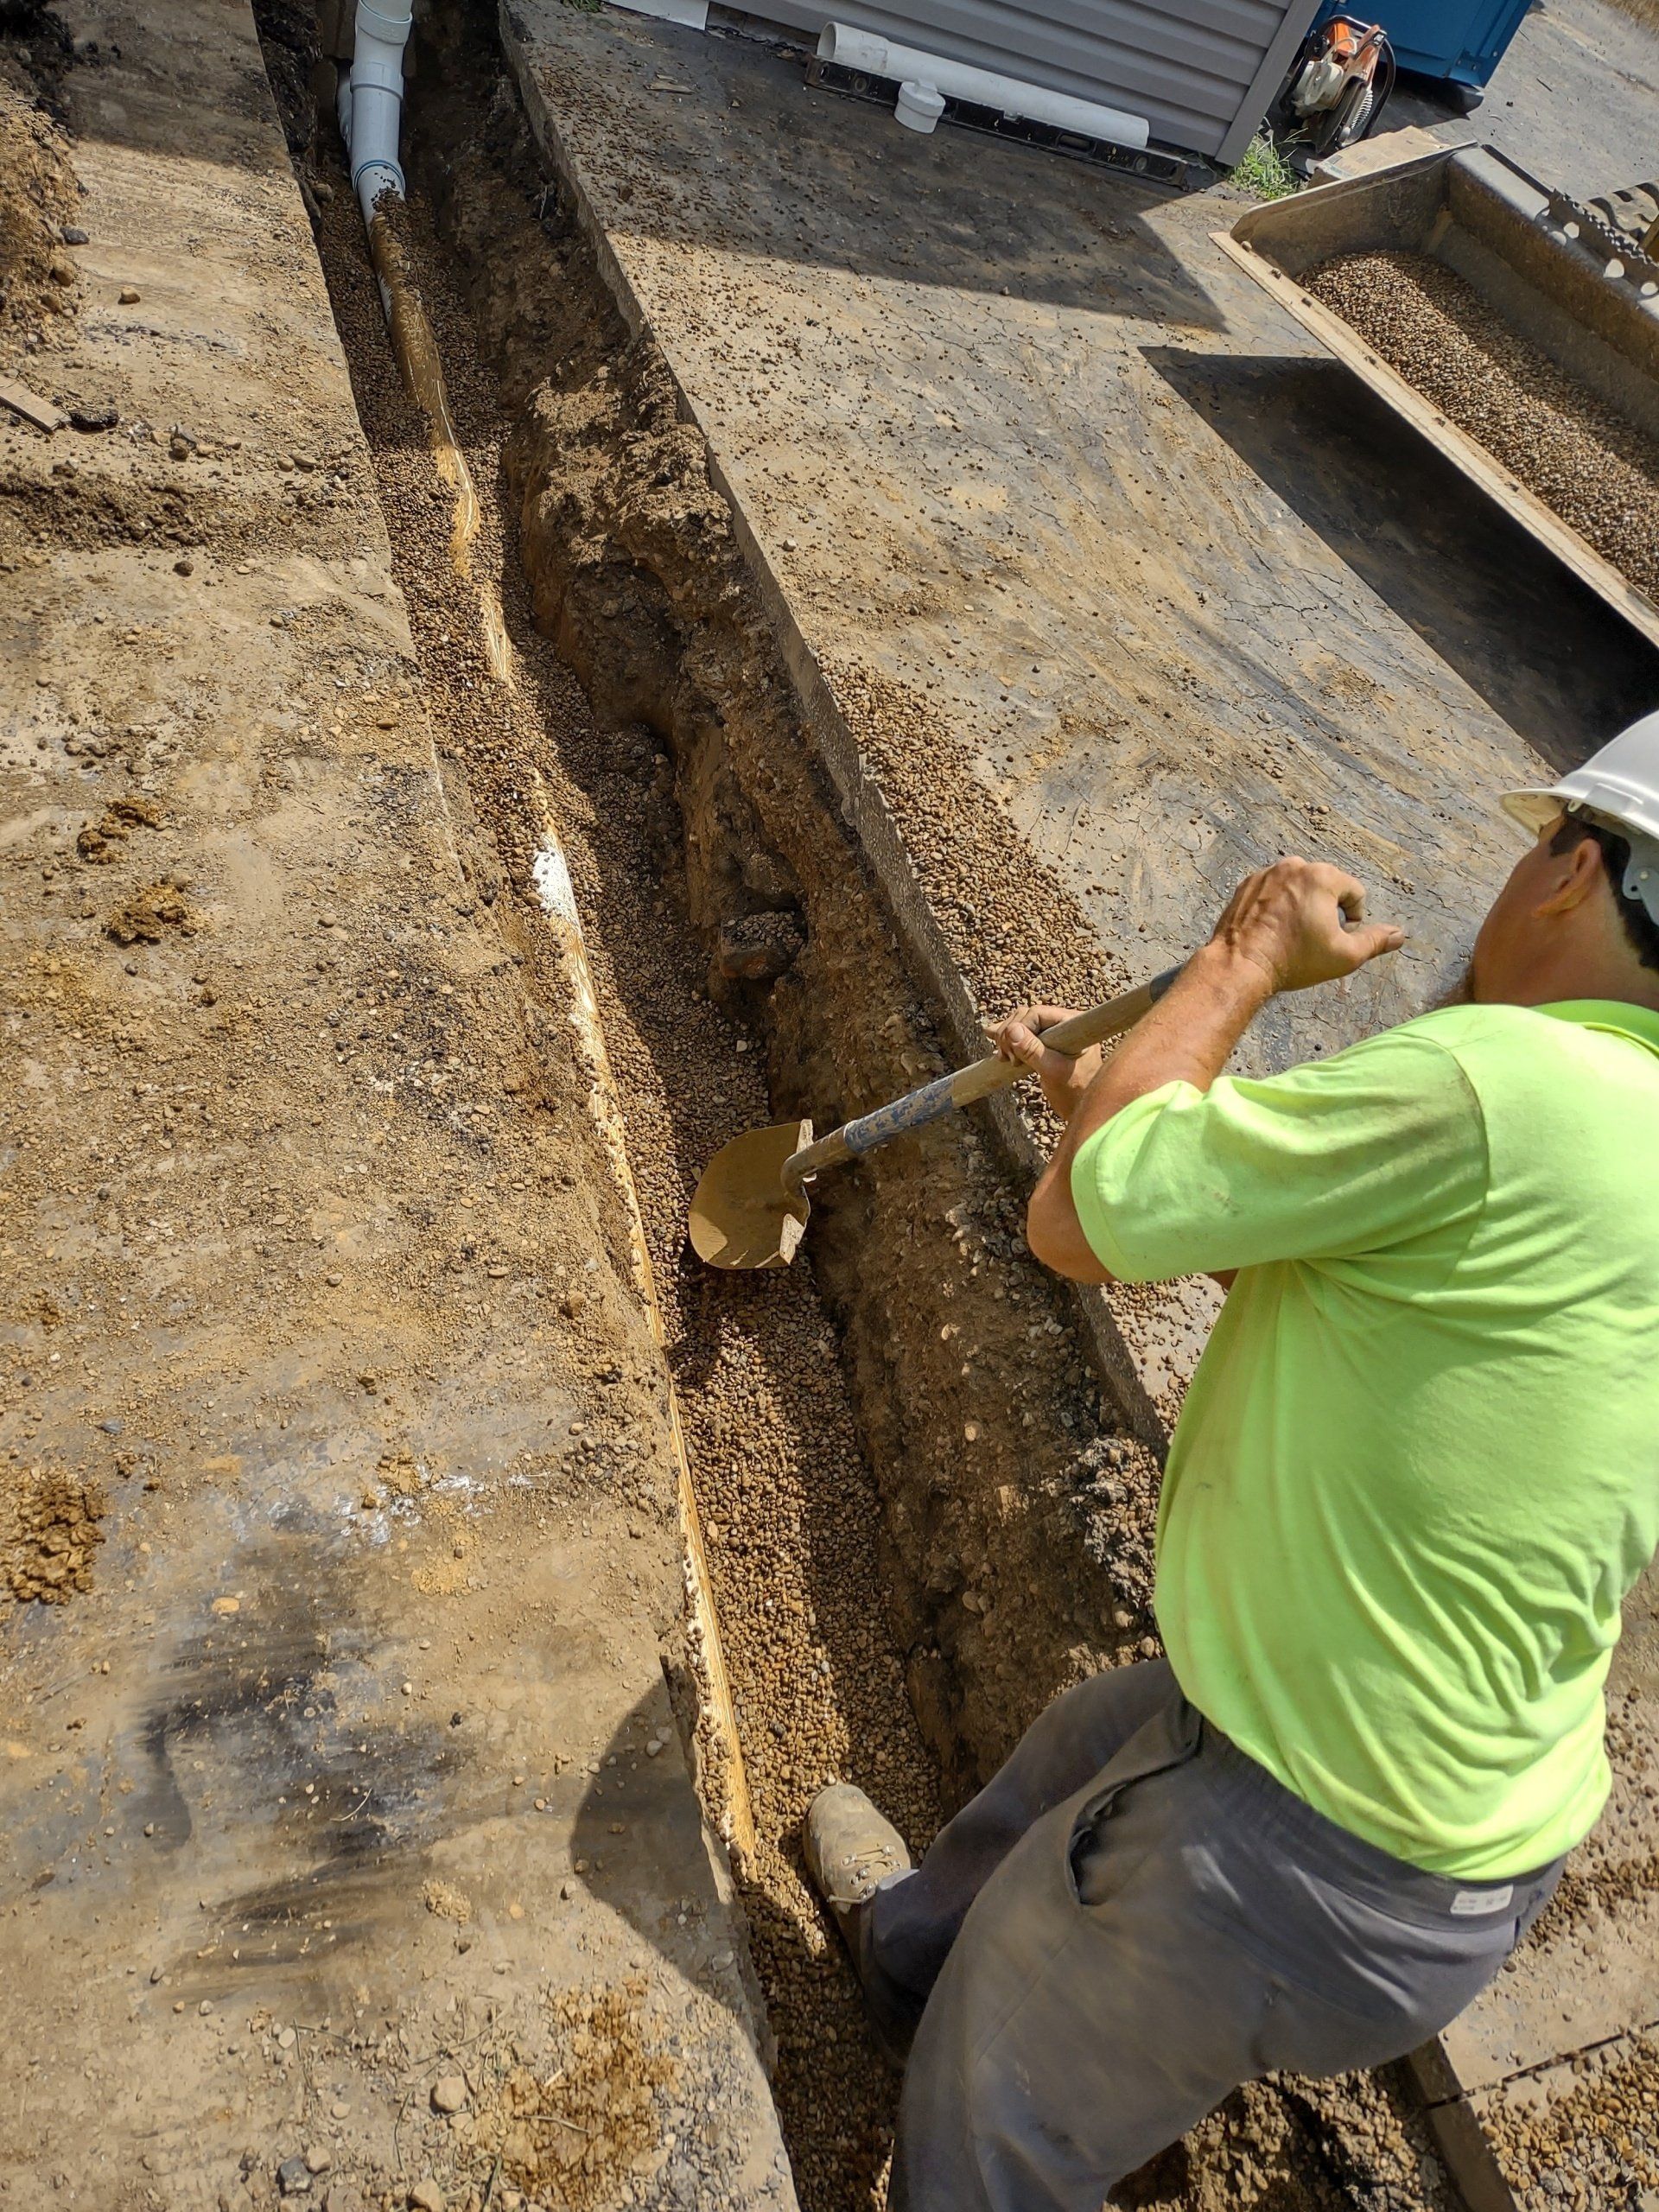 Shrock Excavating team member is digging out the pipe passage way.